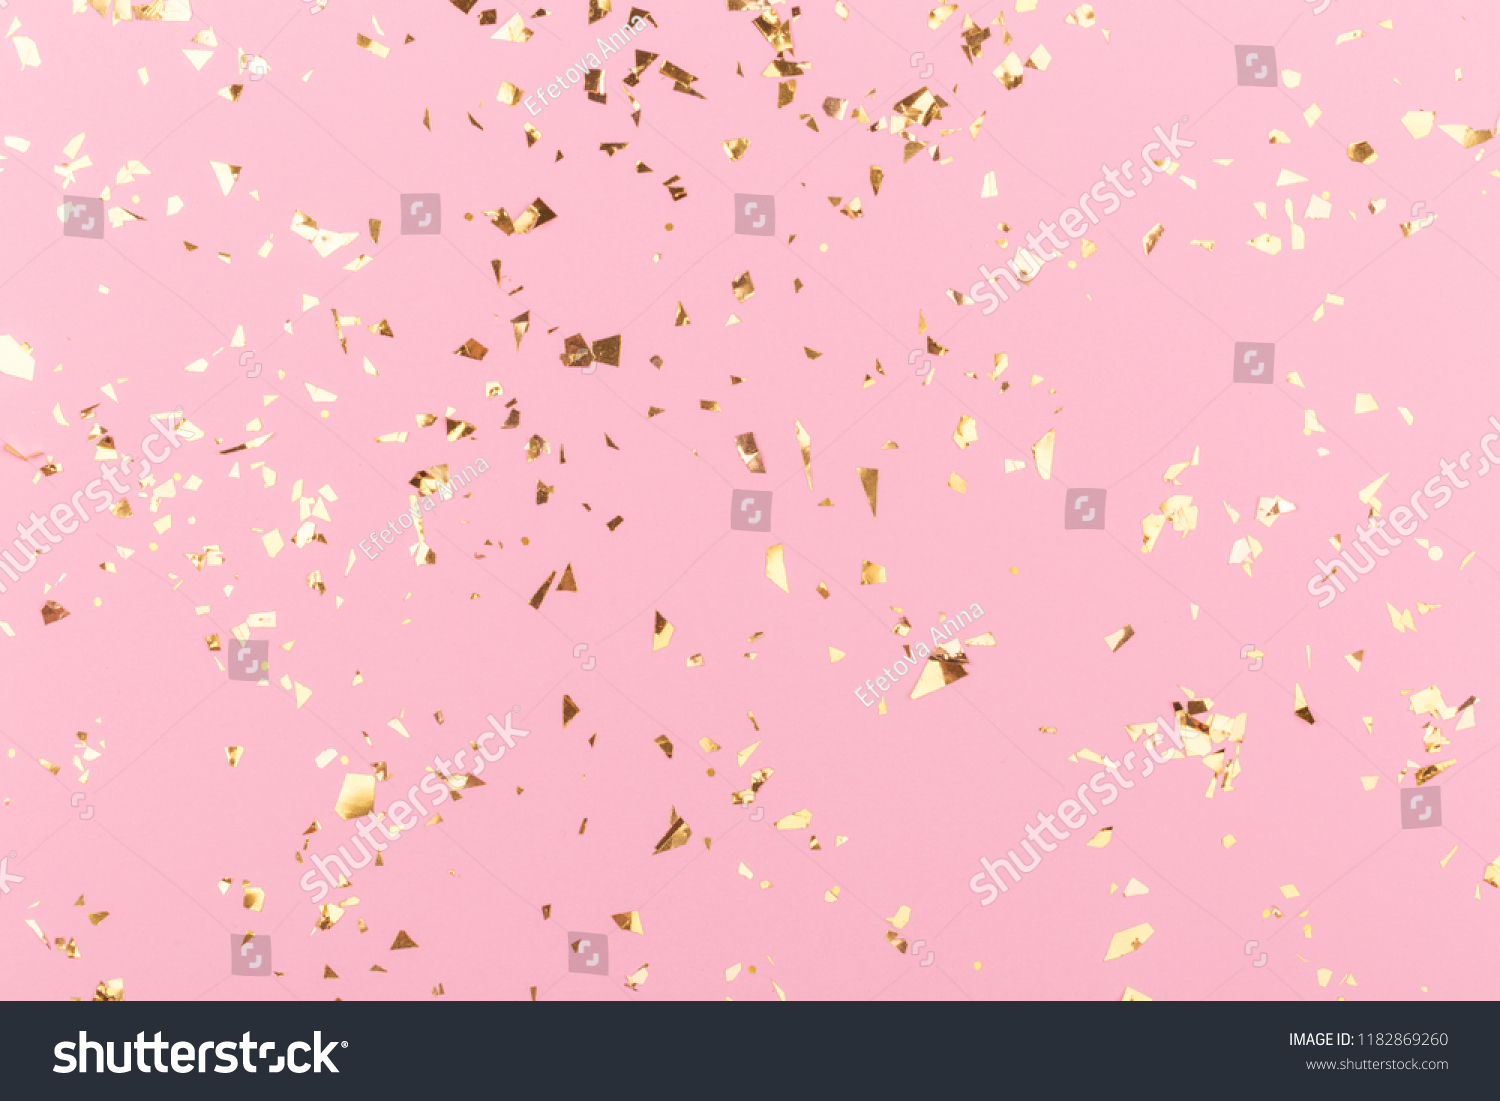 Golden sparkles on pink pastel trendy background. Festive backdrop for your projects. #1182869260